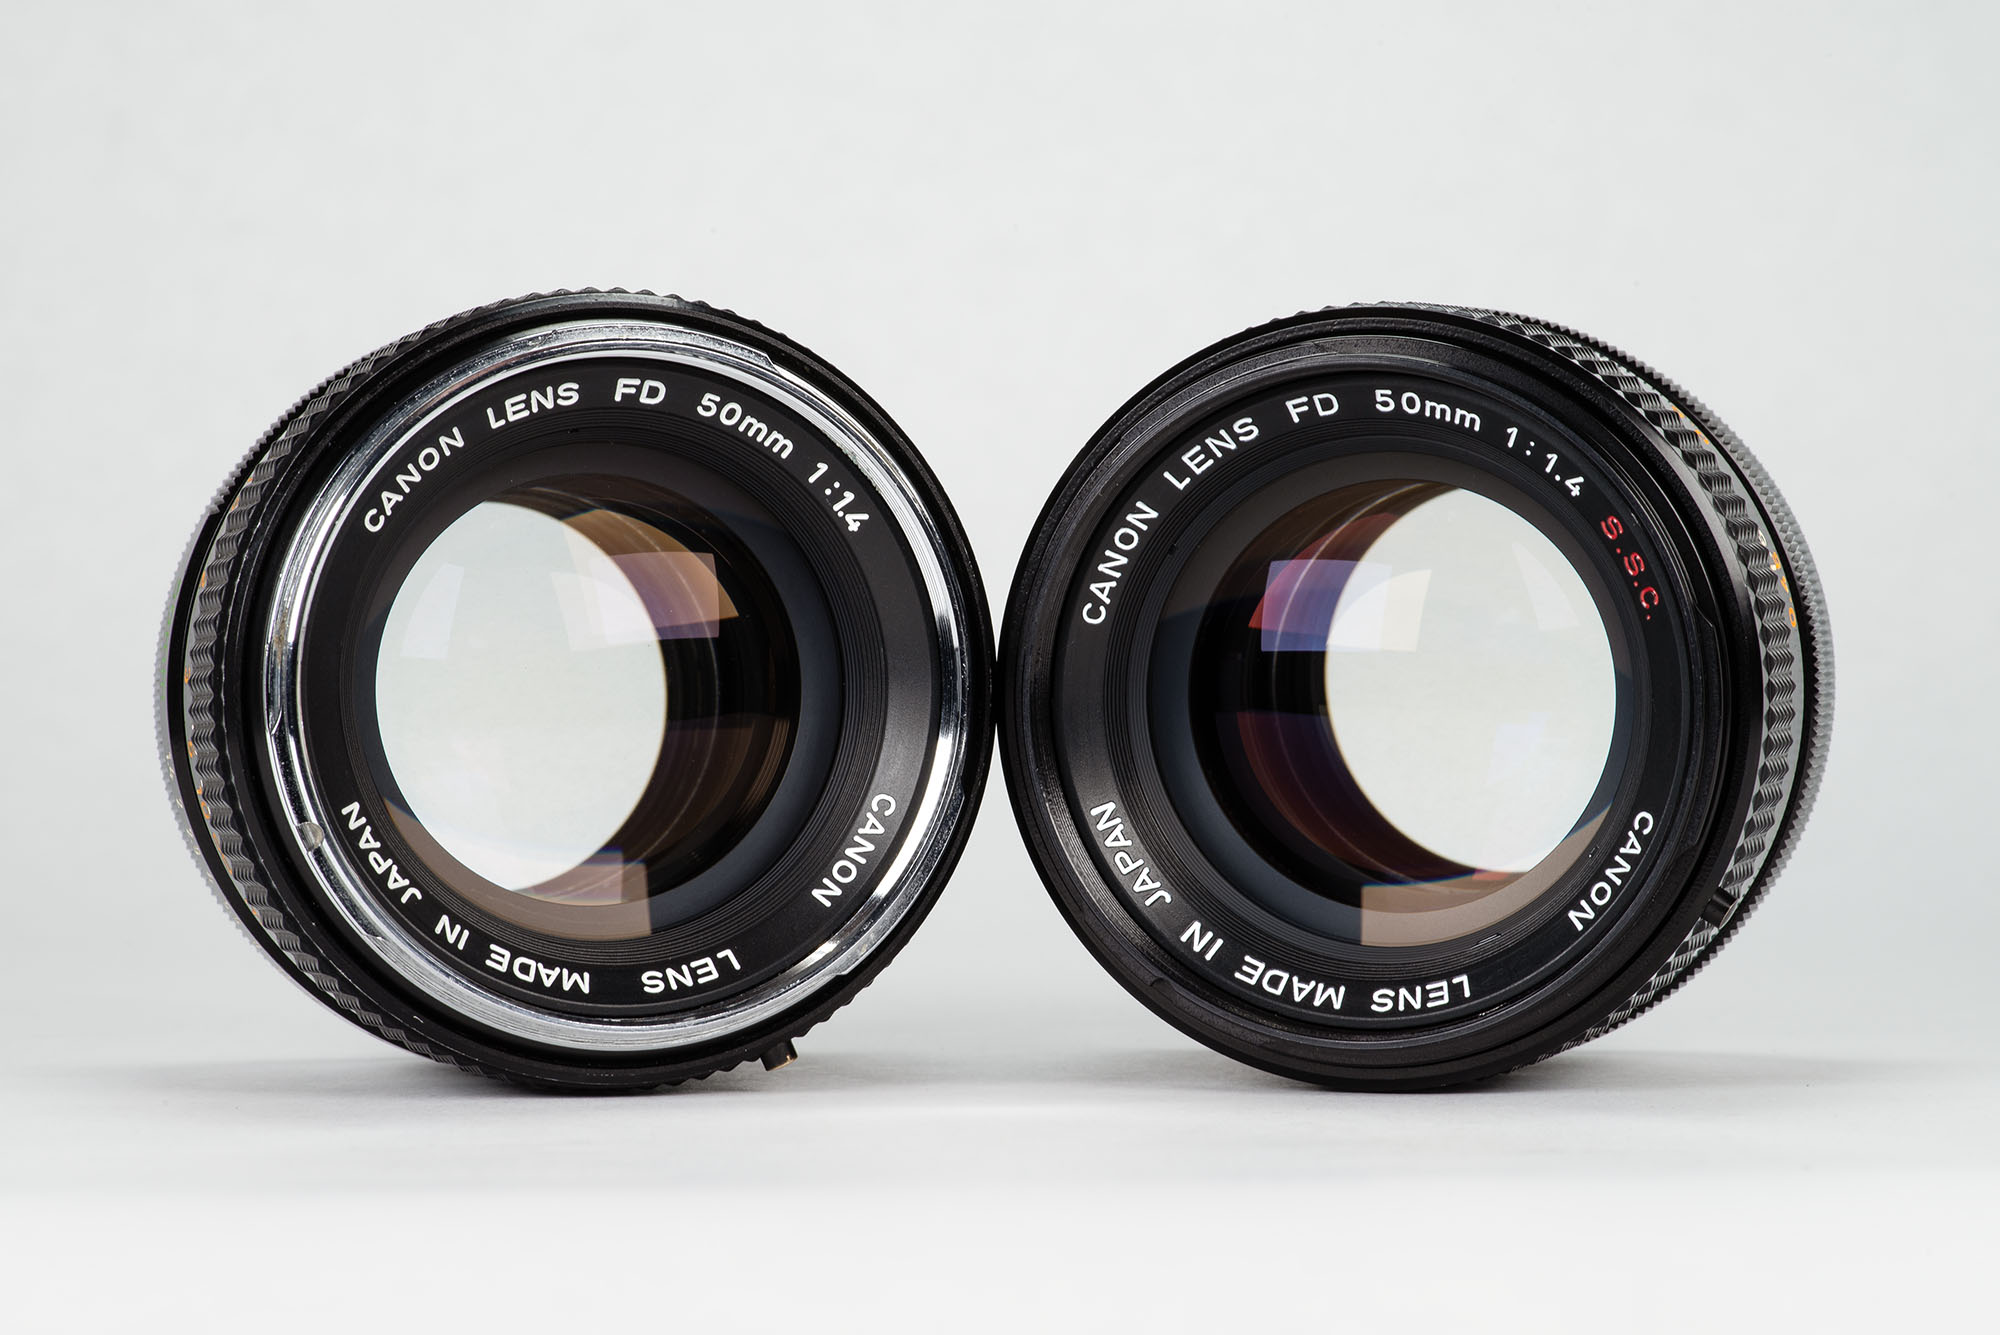 Legacy Lens Review: Canon 50mm f1.4 FD and S.S.C. - The Noisy Shutter